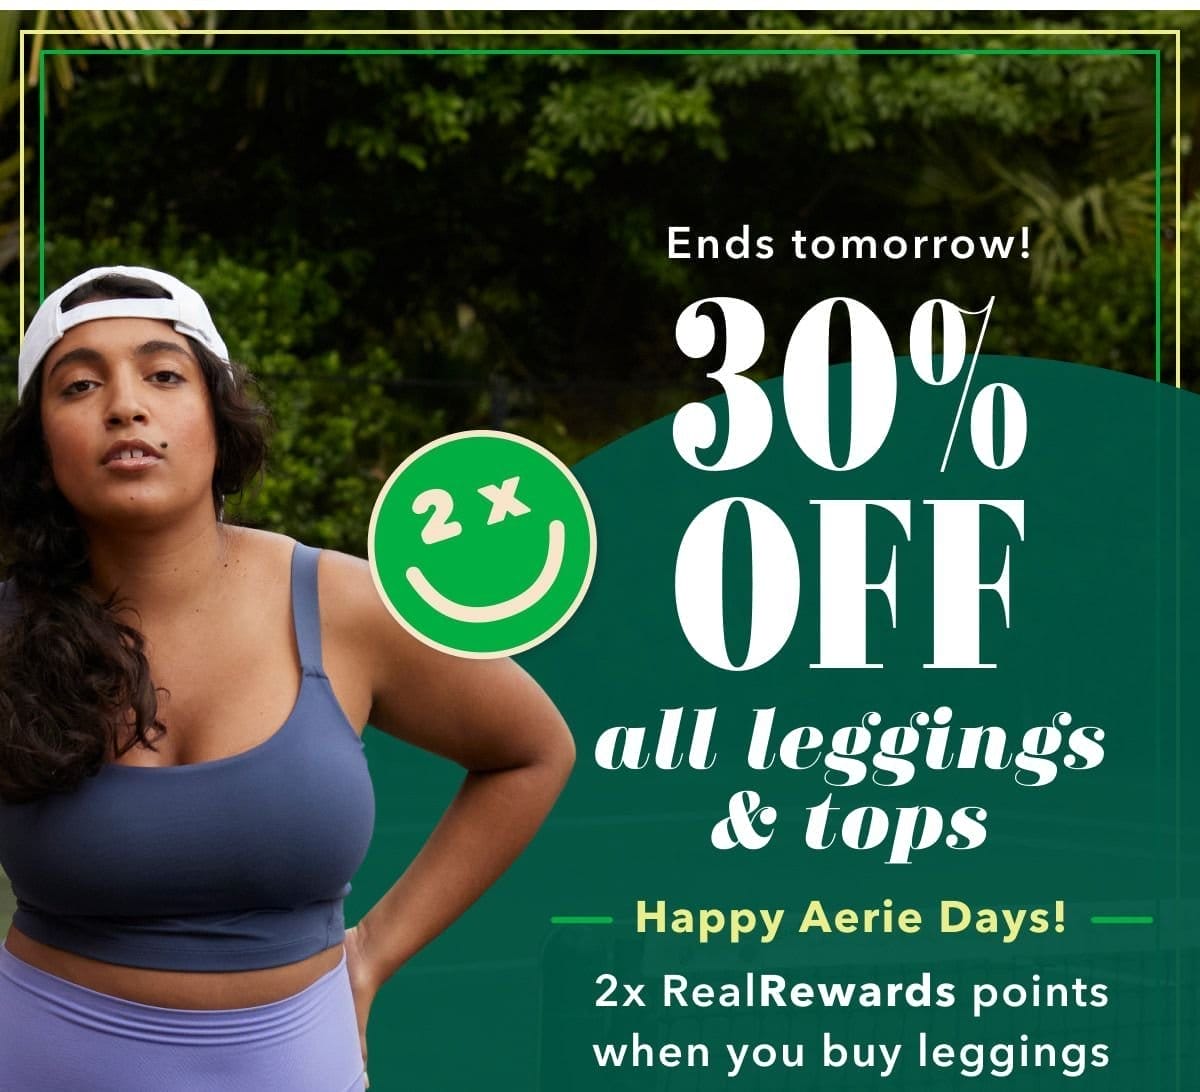 Ends tomorrow! 30% off all leggings & tops | Happy Aerie Days! 2x RealRewards points when you buy leggings